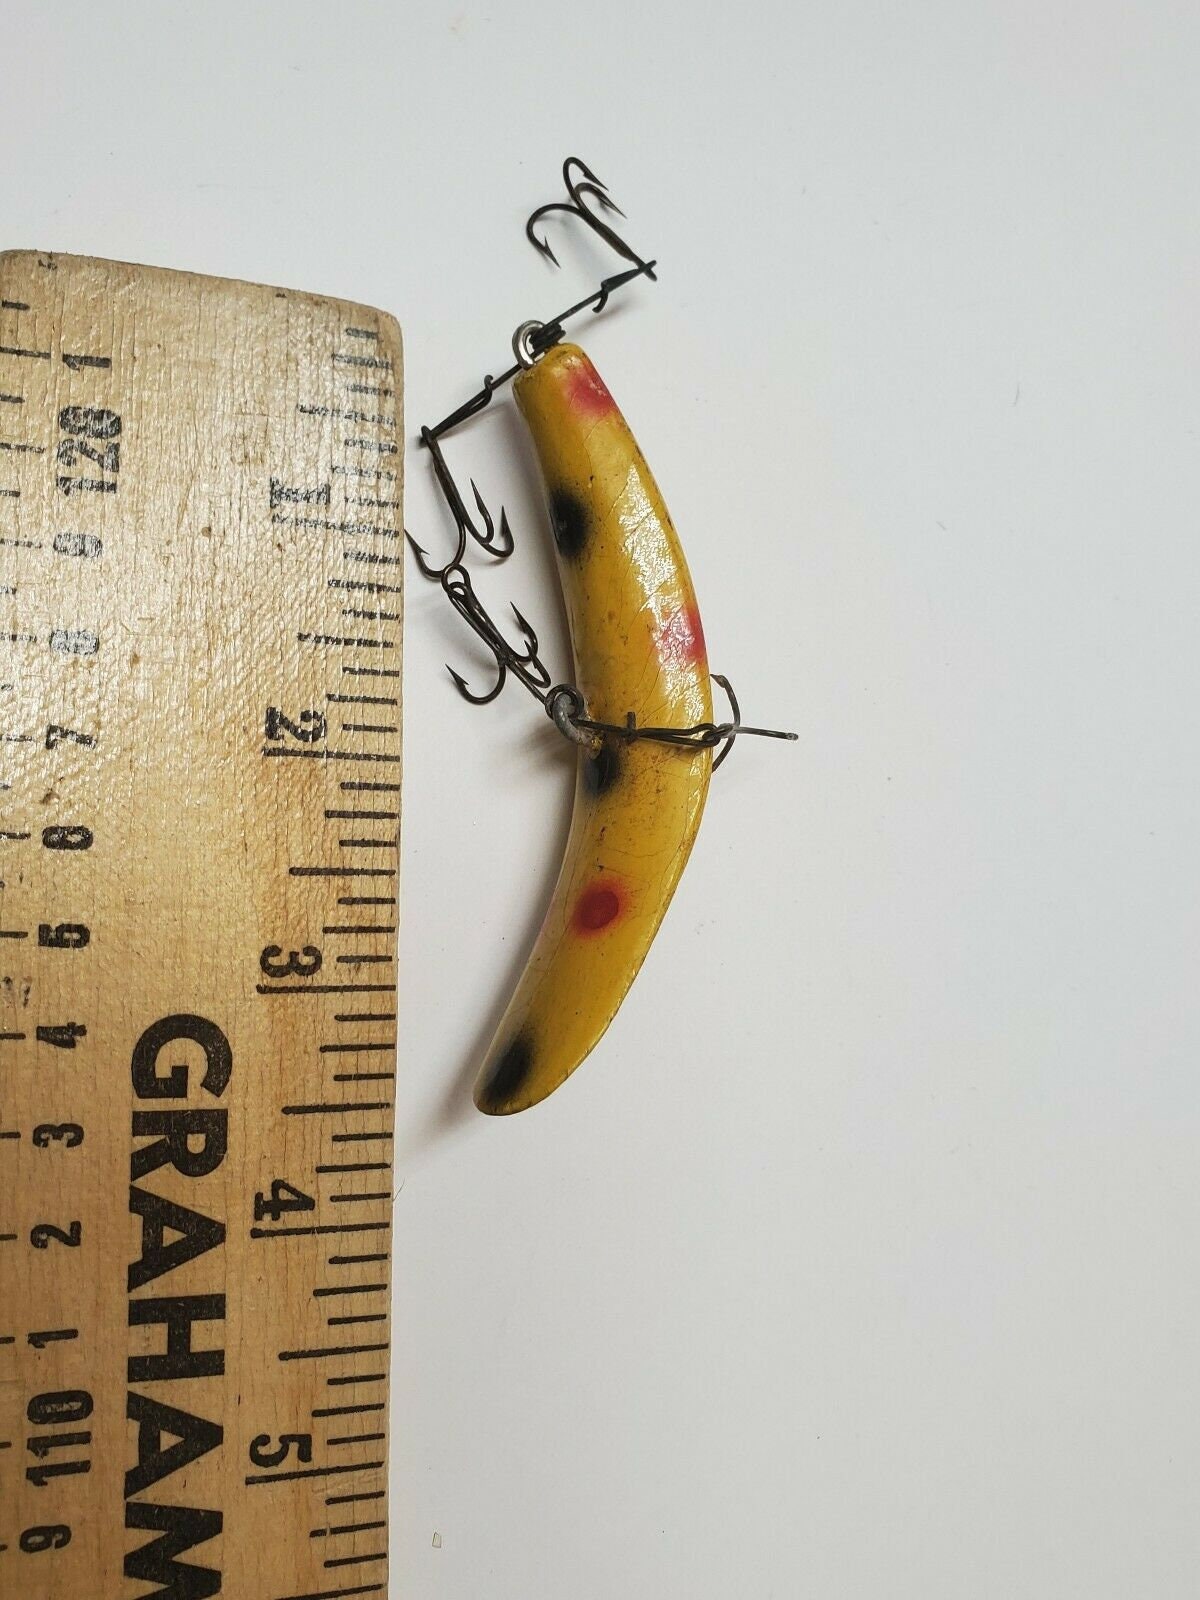 VINTAGE WOODEN FISHING Lure Yellow Black & Rd Spotted Double Hooks Fish  Lure Antique Collectible Sporting Goods Lure 